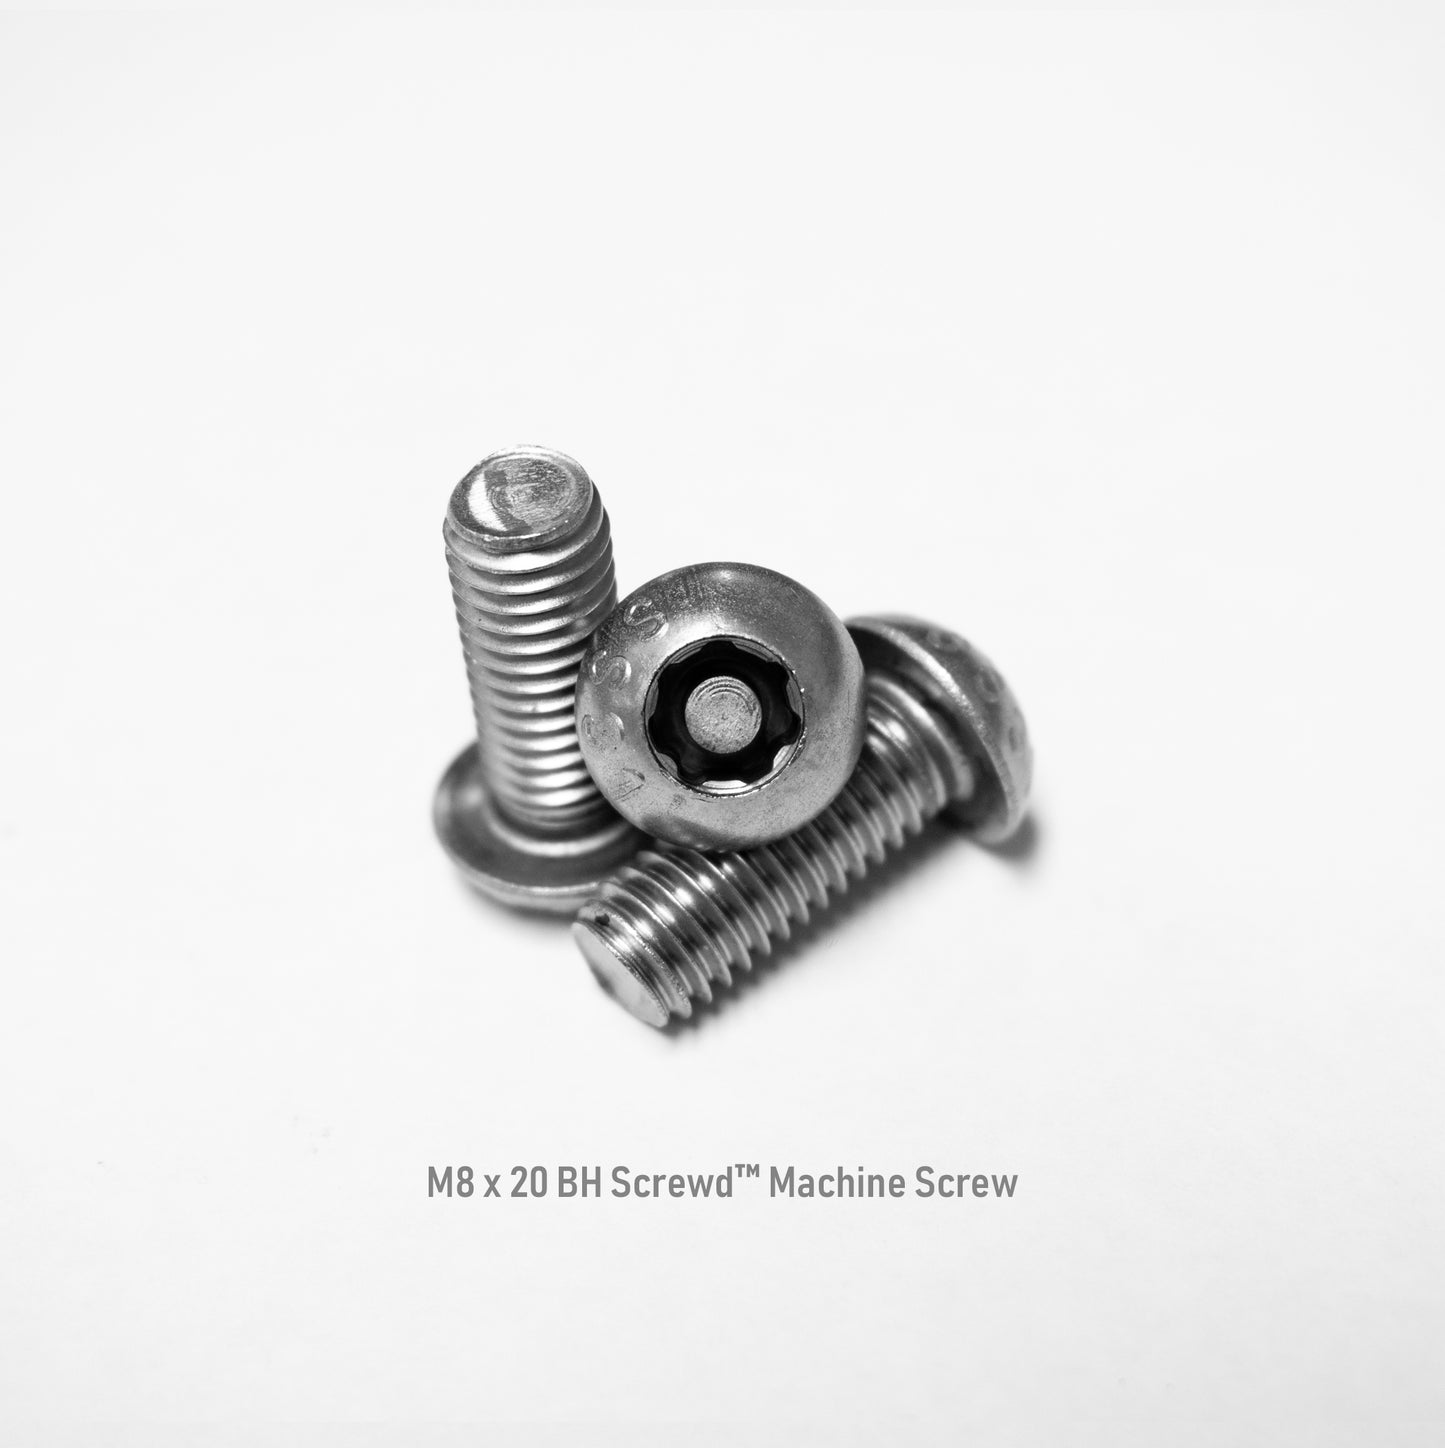 M8 x 20 Button Head Screwd® Security Metric Machine Screw Made out of Stainless Steel